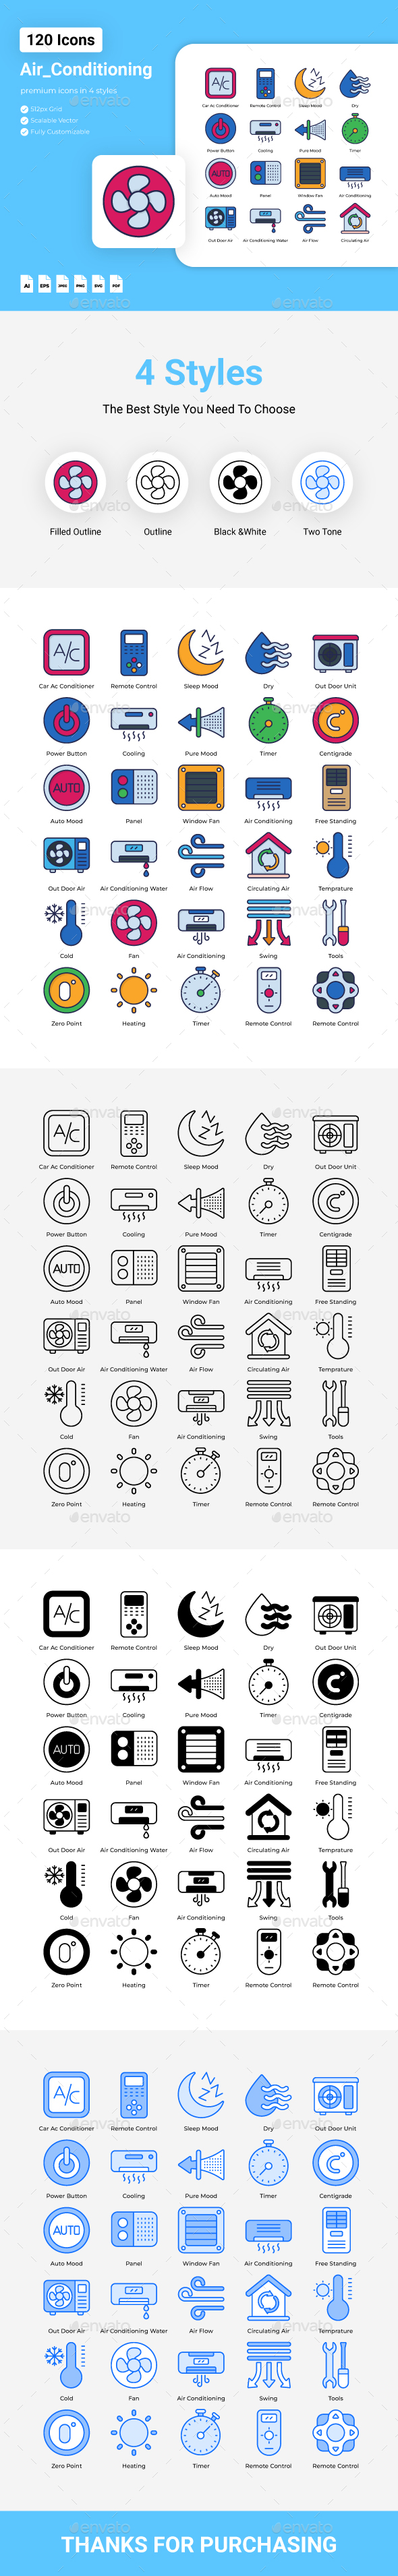 [DOWNLOAD]Air Conditioning Icons